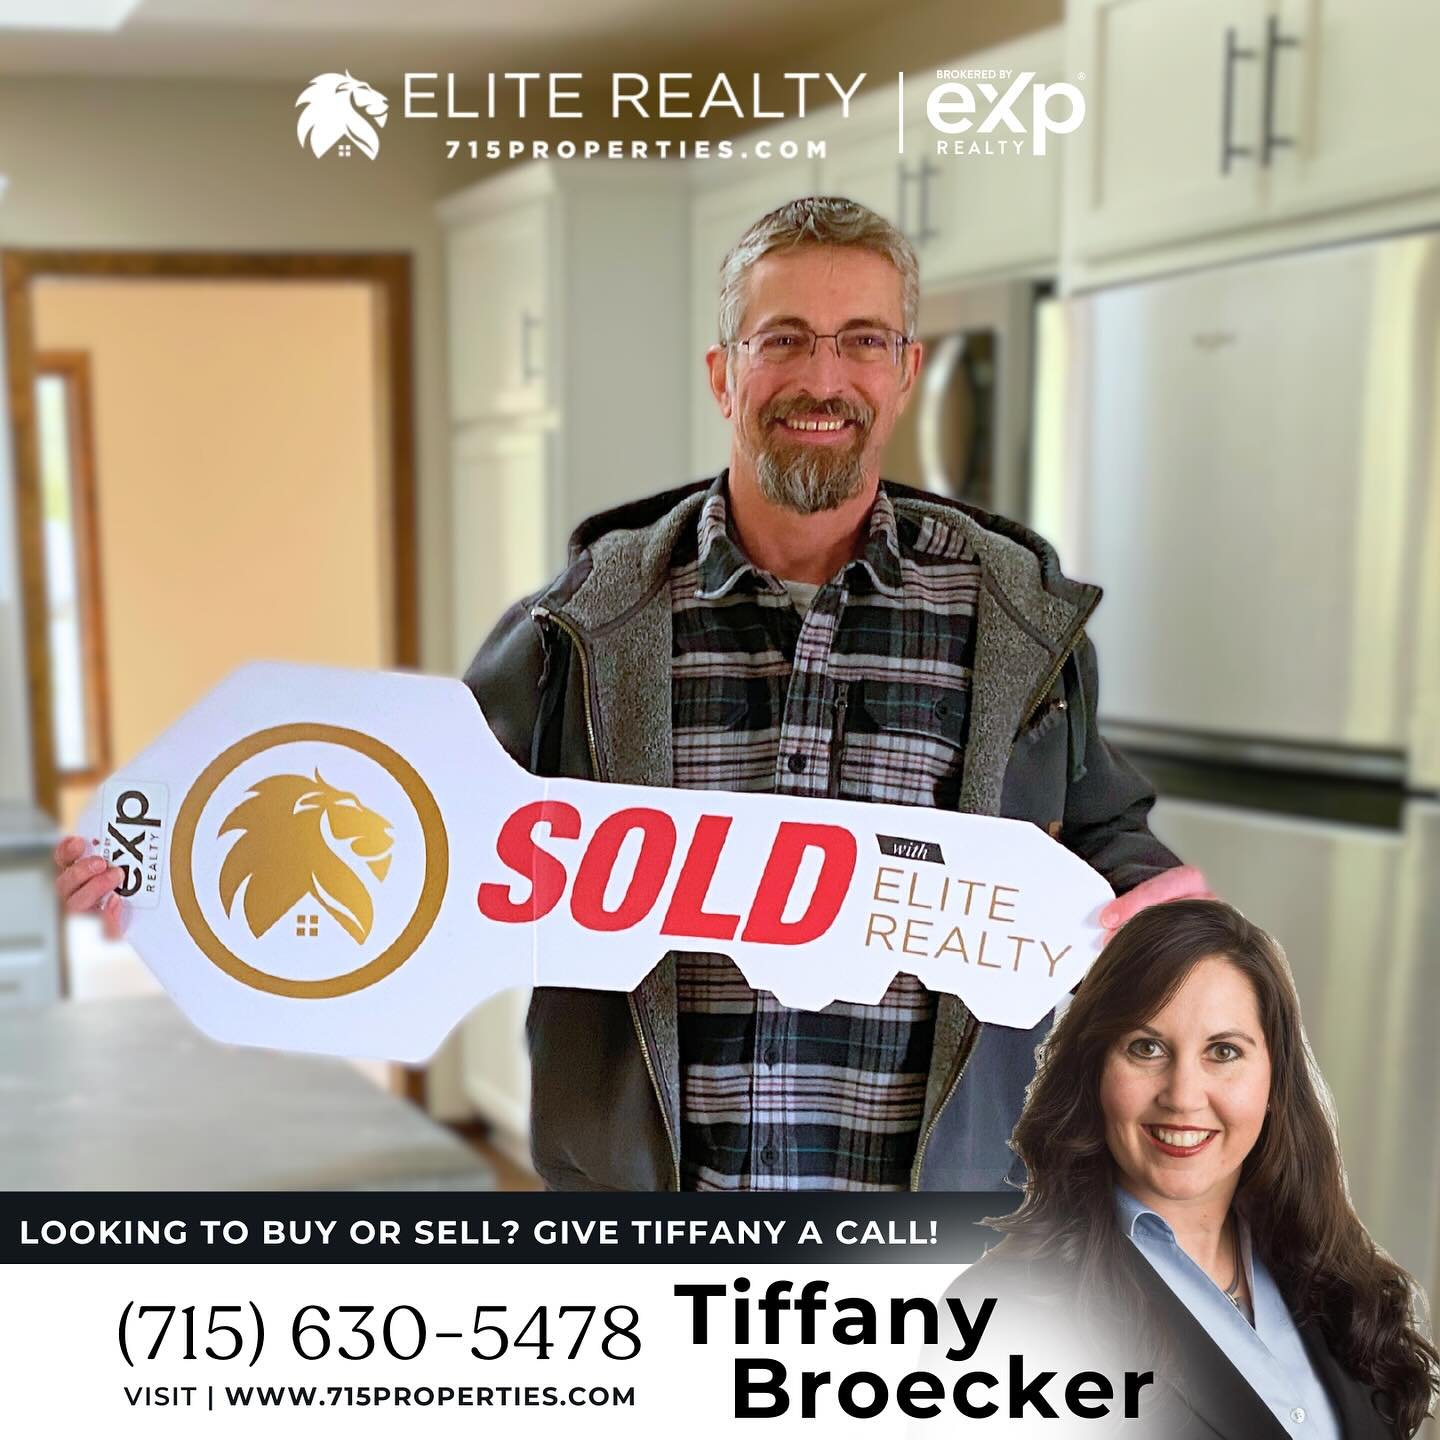 Congratulations to Tiffany&rsquo;s buyers Mason &amp; Melissa!&nbsp;Thank you for the opportunity to represent you.&nbsp;I&rsquo;m so glad to have found you the perfect home 🏠 Gratitude and best wishes!&nbsp;Until the next round, cheers! #sold 

@ti